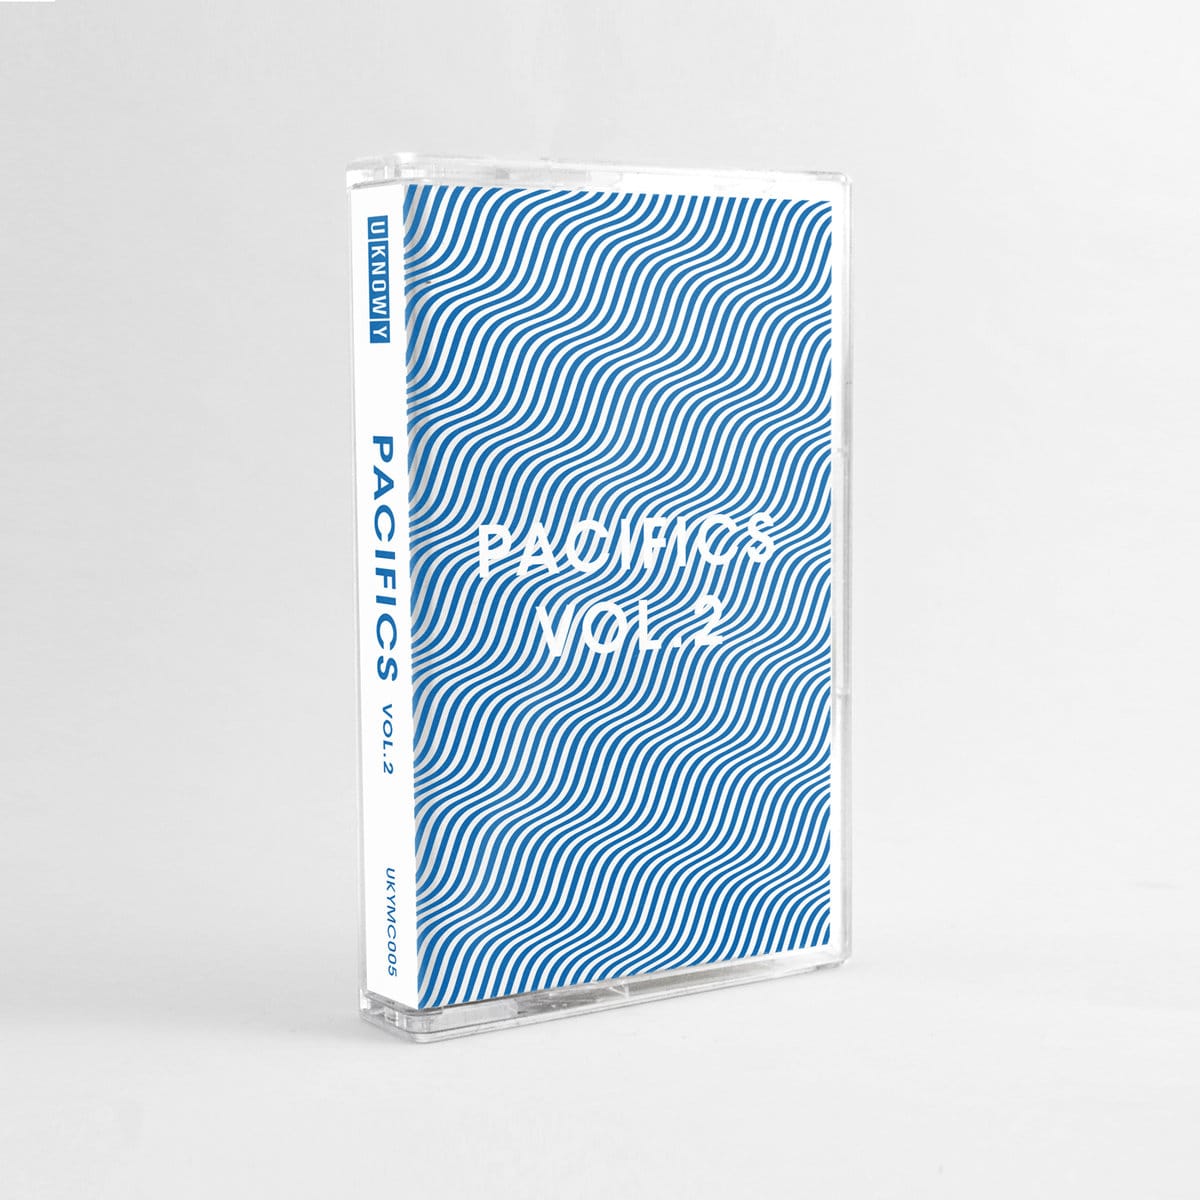 UKNOWY Music - "PACIFICS, Vol. 2" (Release)